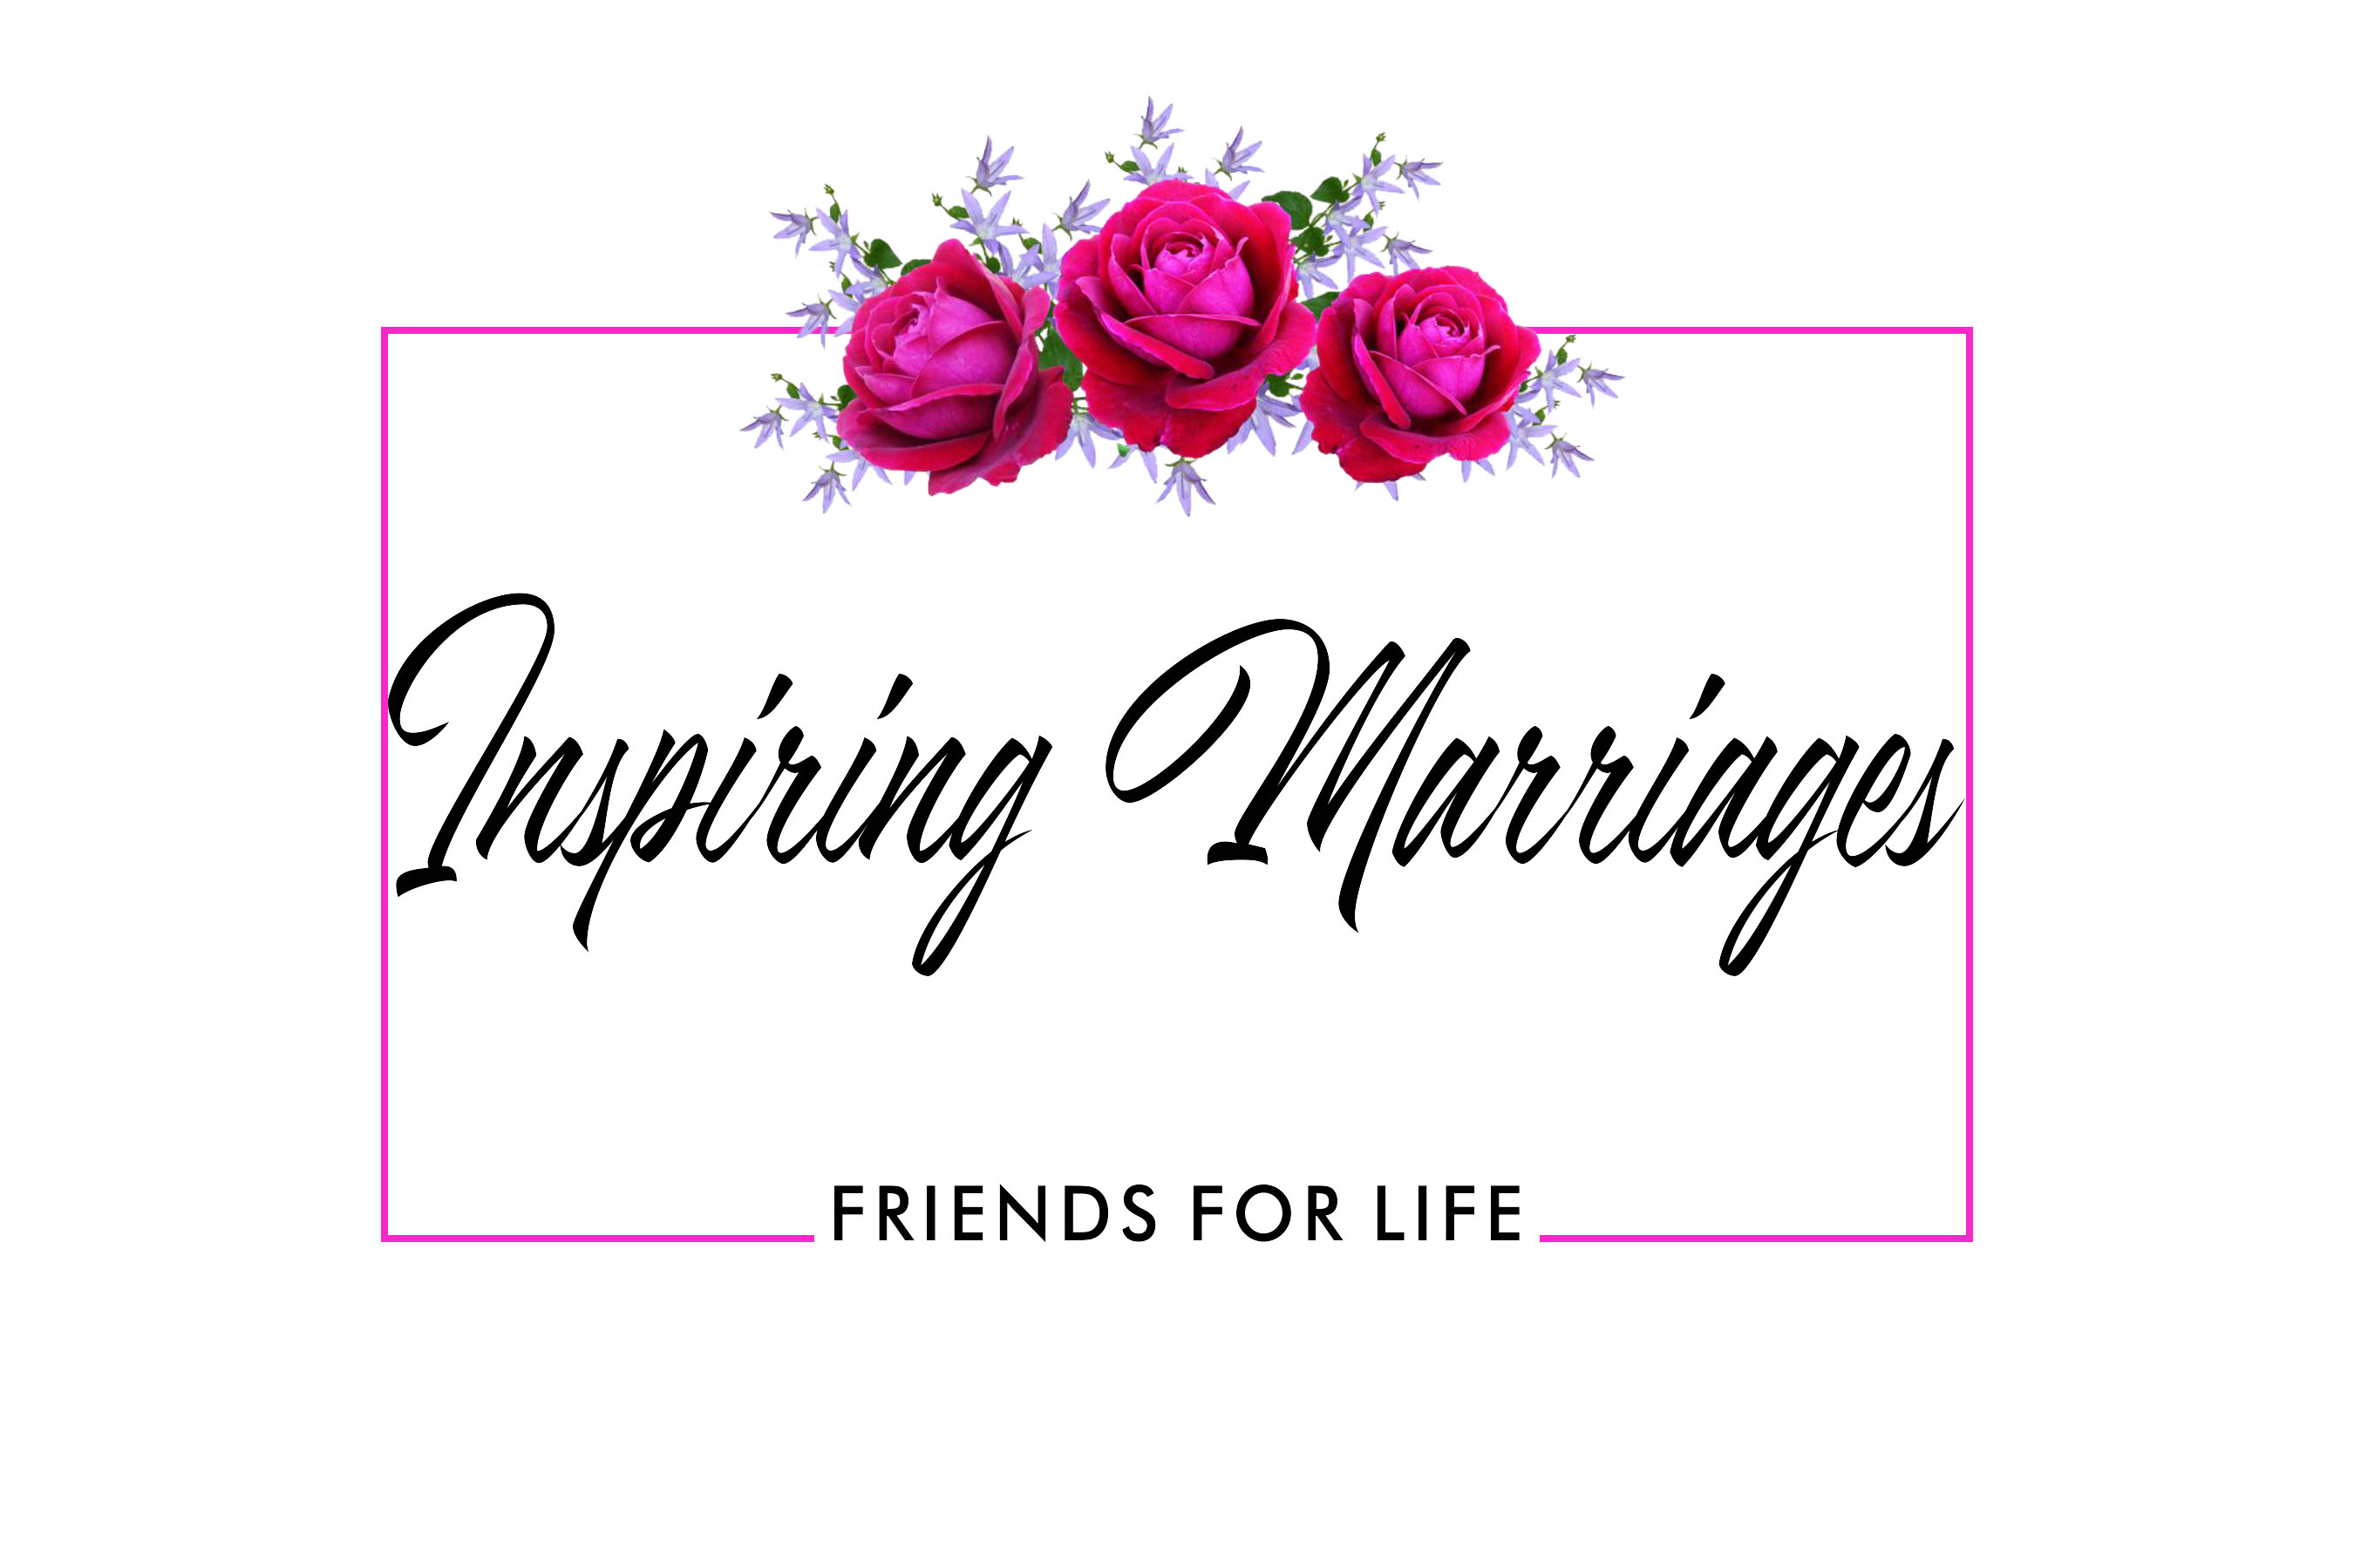 Inspiring Marriages